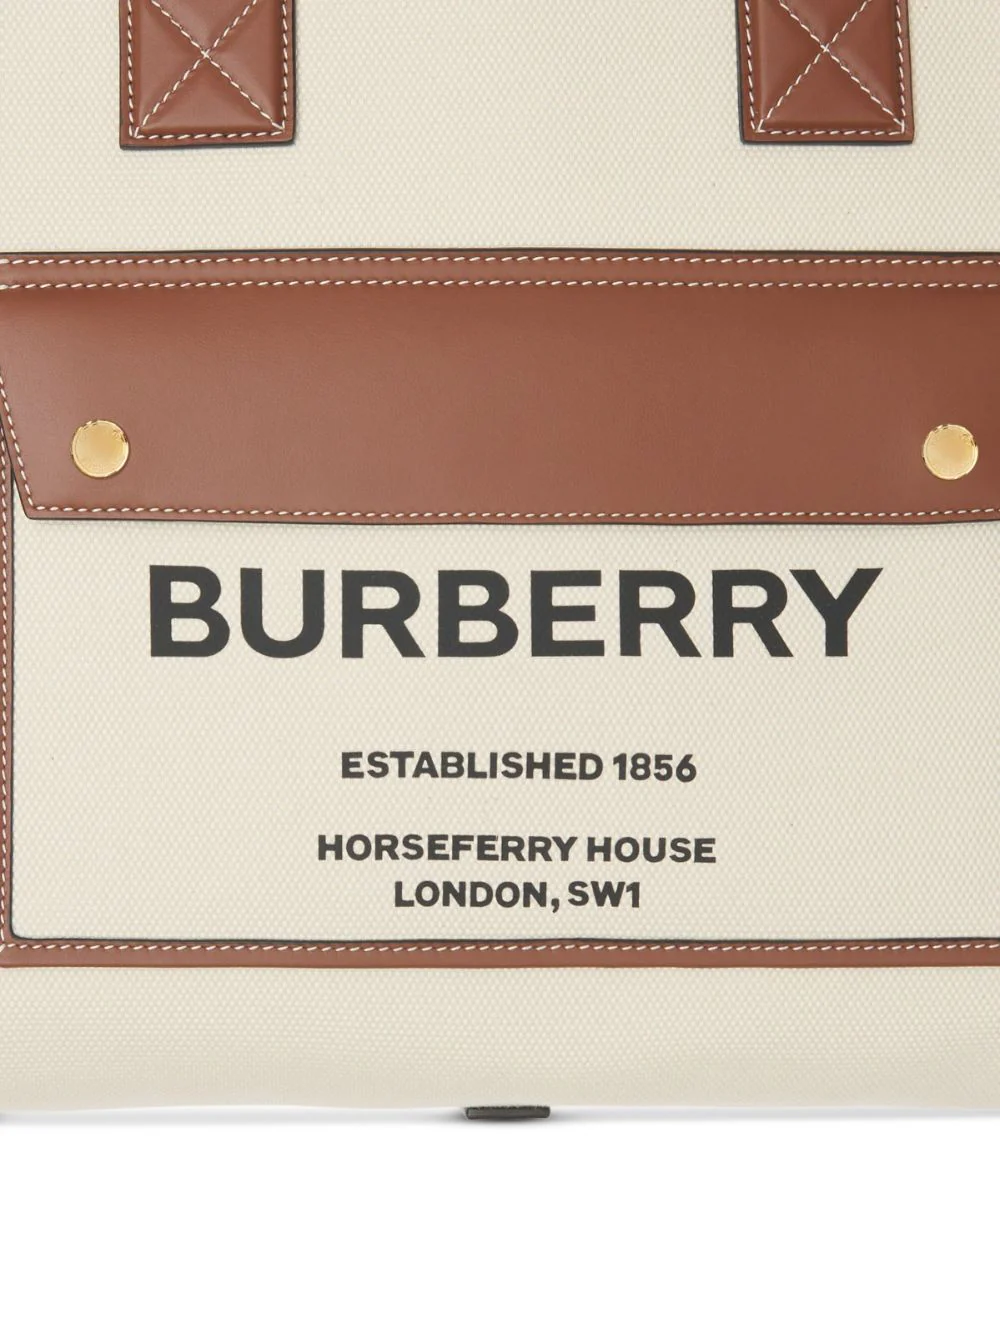 Burberry, Bags, Burberry Medium Twotone Canvas And Leather Freya Tote